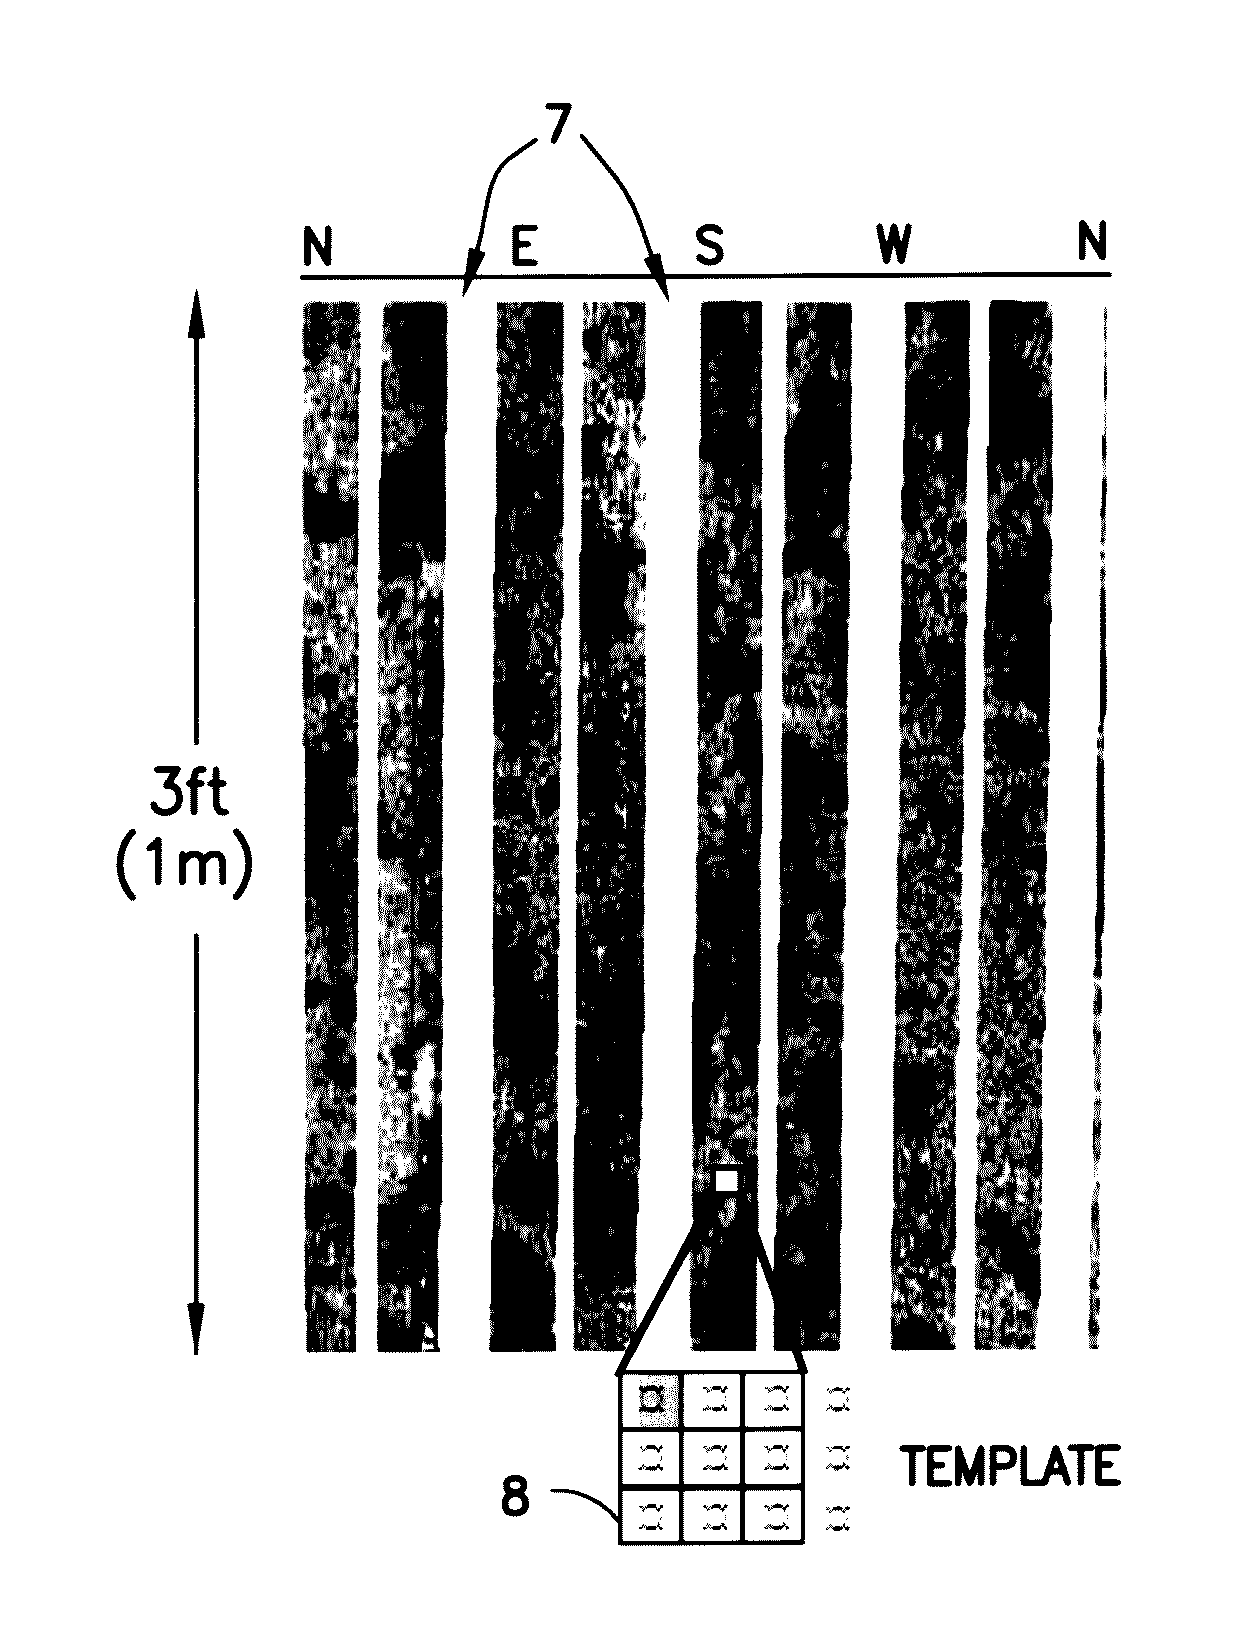 Method for characterizing a geological formation traversed by a borehole